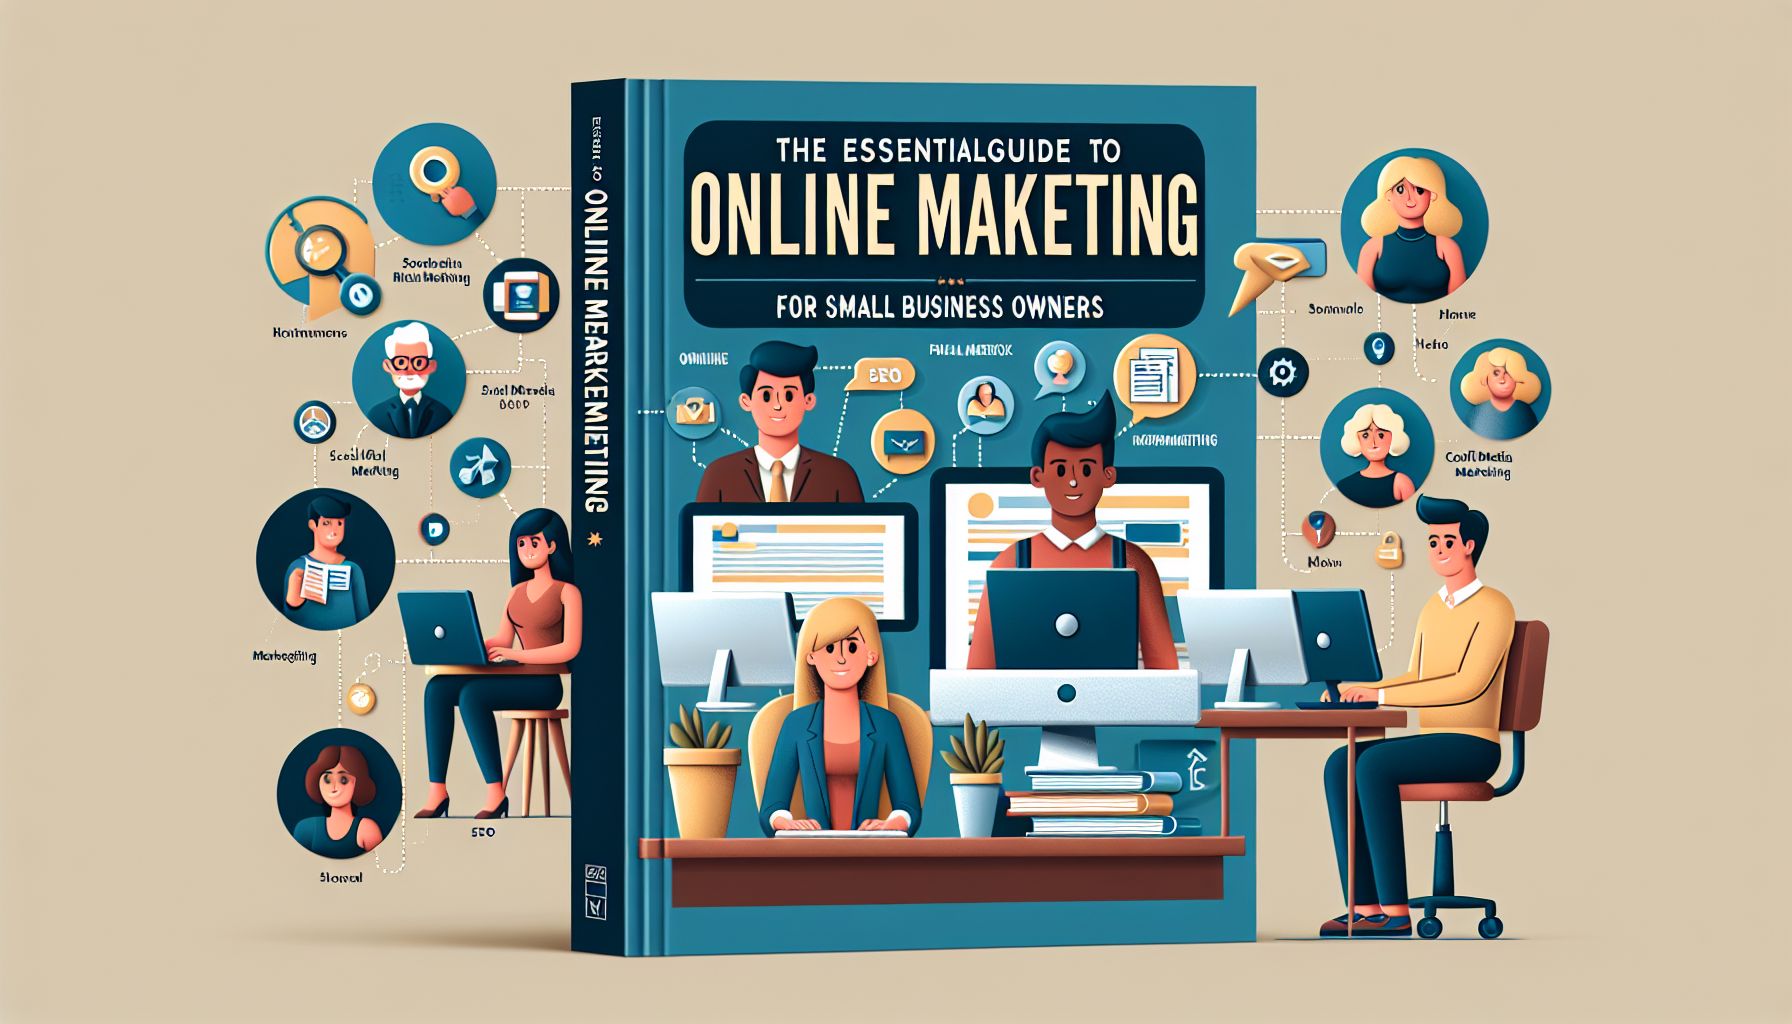 The Essential Guide to Online Marketing for Small Business Owners